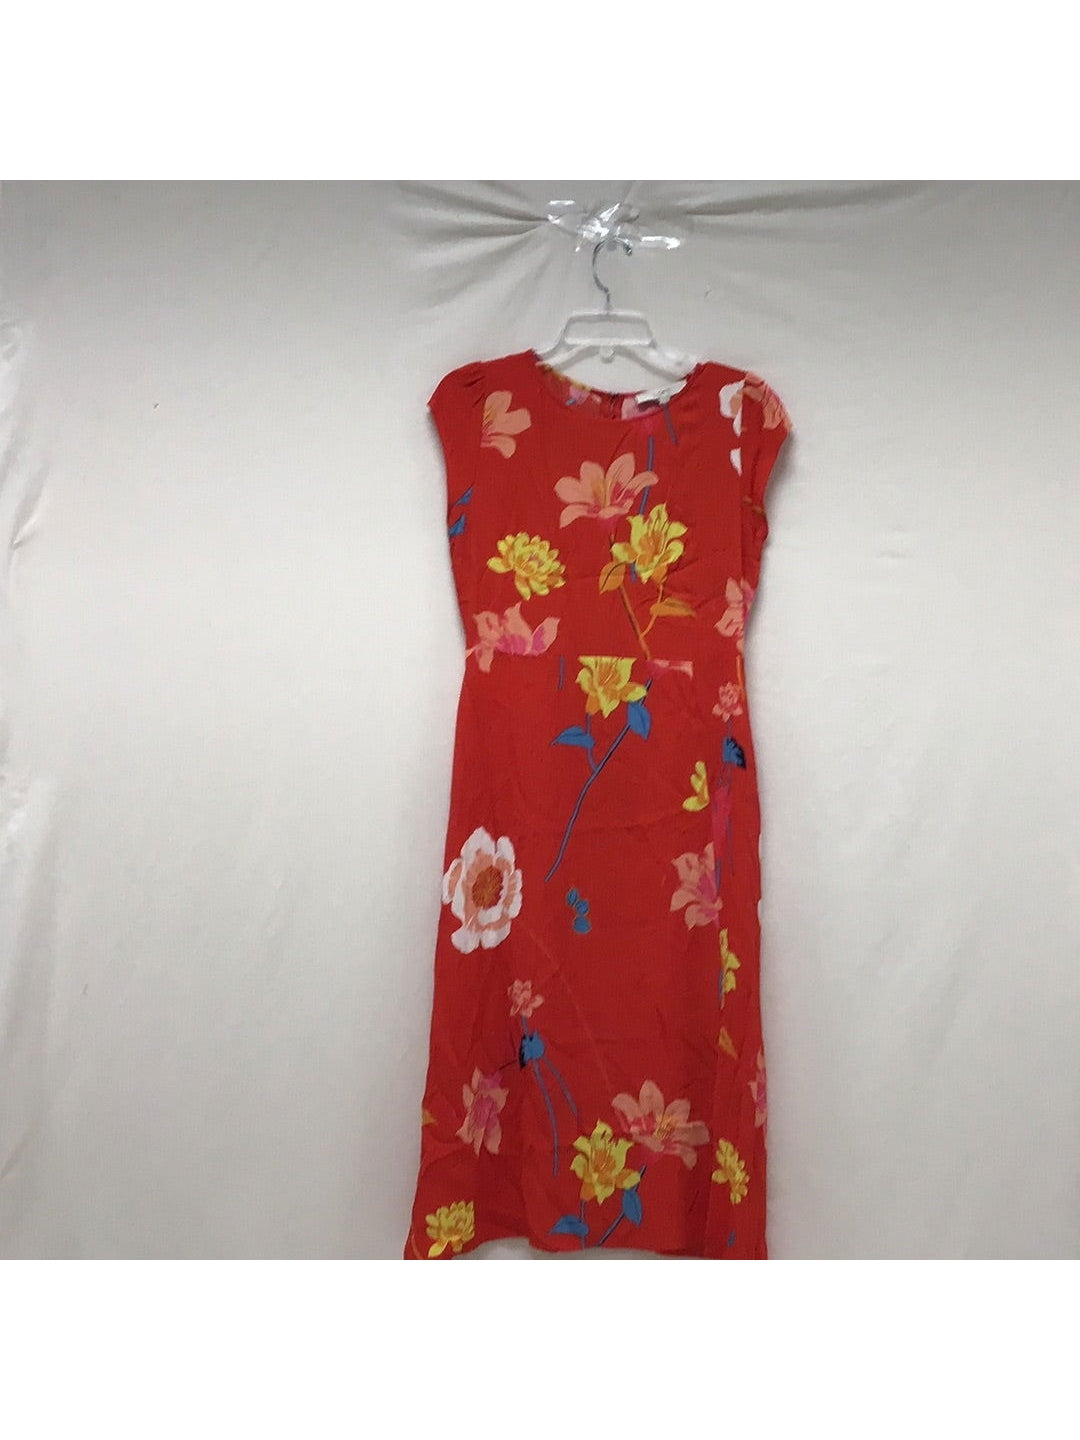 LOFT Ladies Size 2 Bright Orange Multi Colored Flower Long Length Dress - The Kennedy Collective Thrift - 